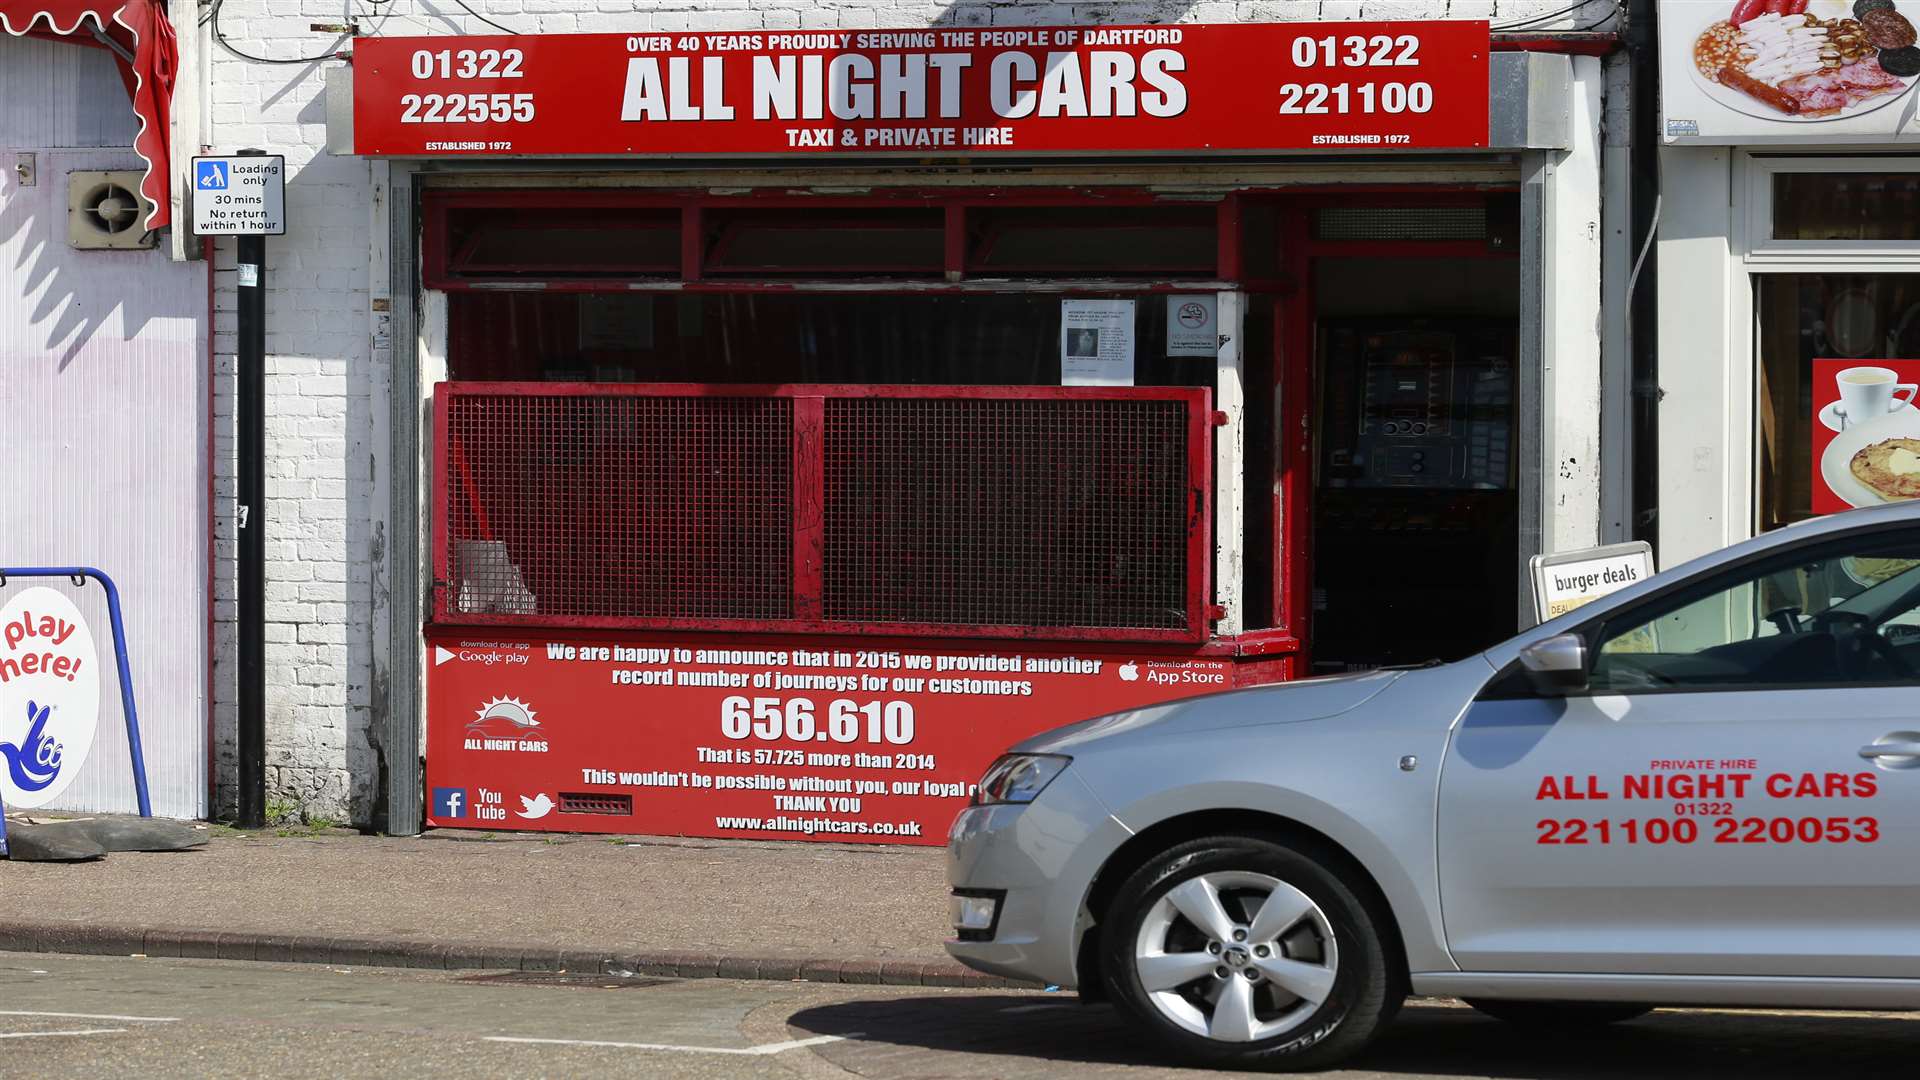 All Night Car Hire already has its own app. Picture: Martin Apps